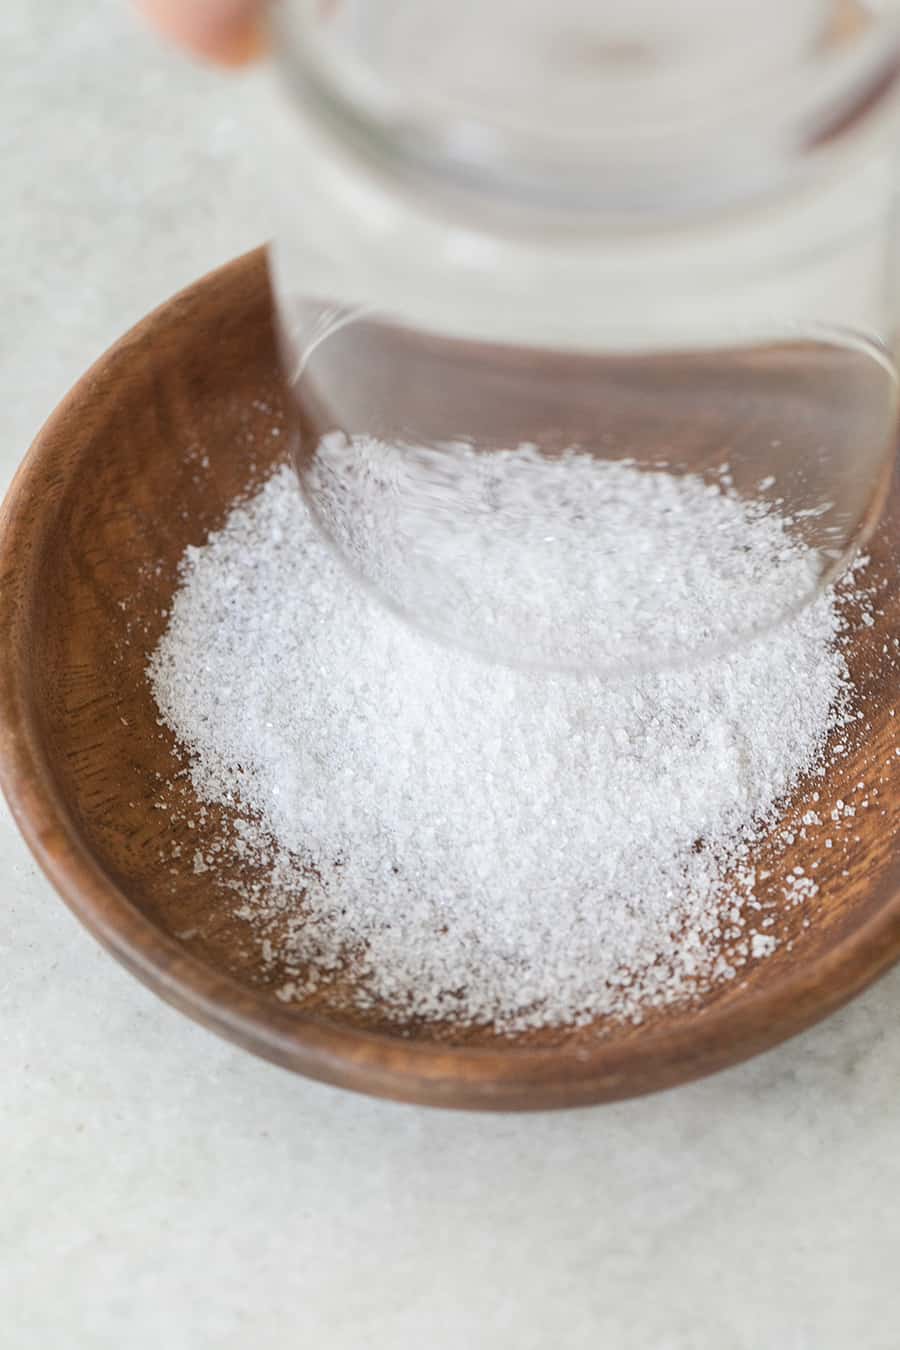 Rimming a glass with rock salt in a wooden bowl.